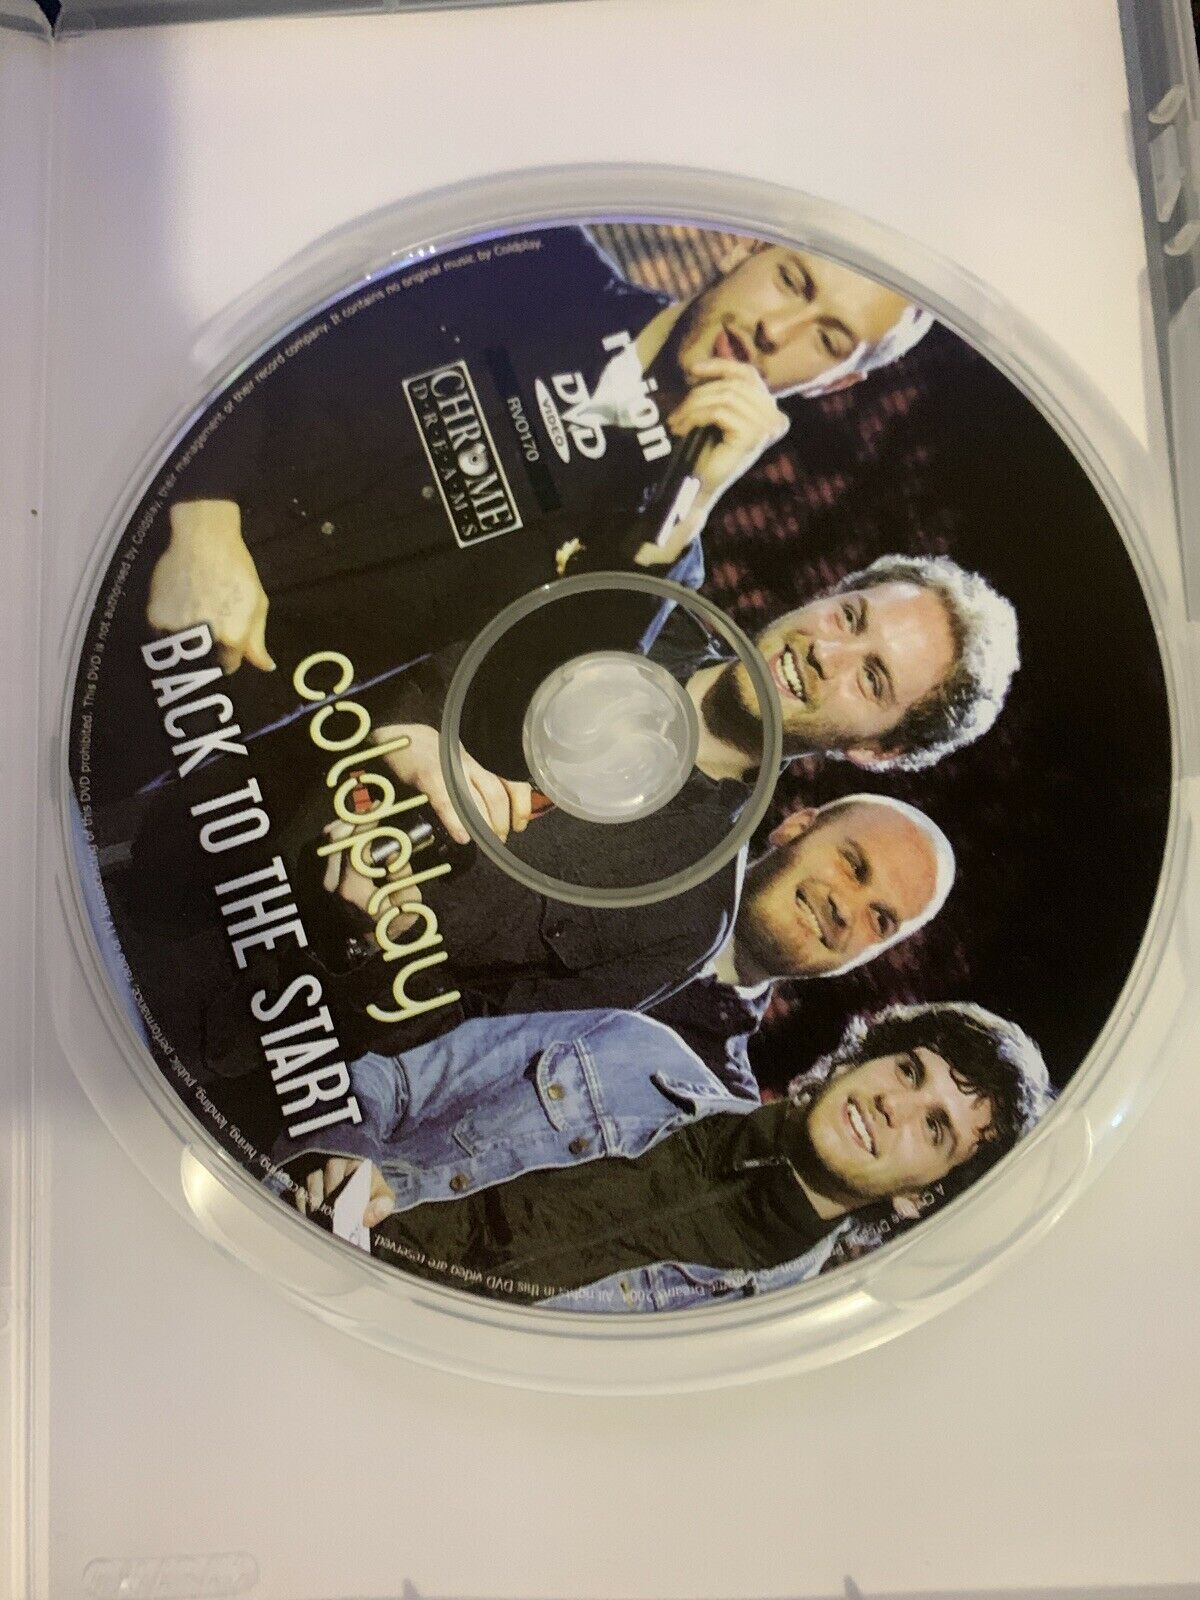 Coldplay - Back To The Start (DVD, 2003) Interviews & Rare Footage. All Regions